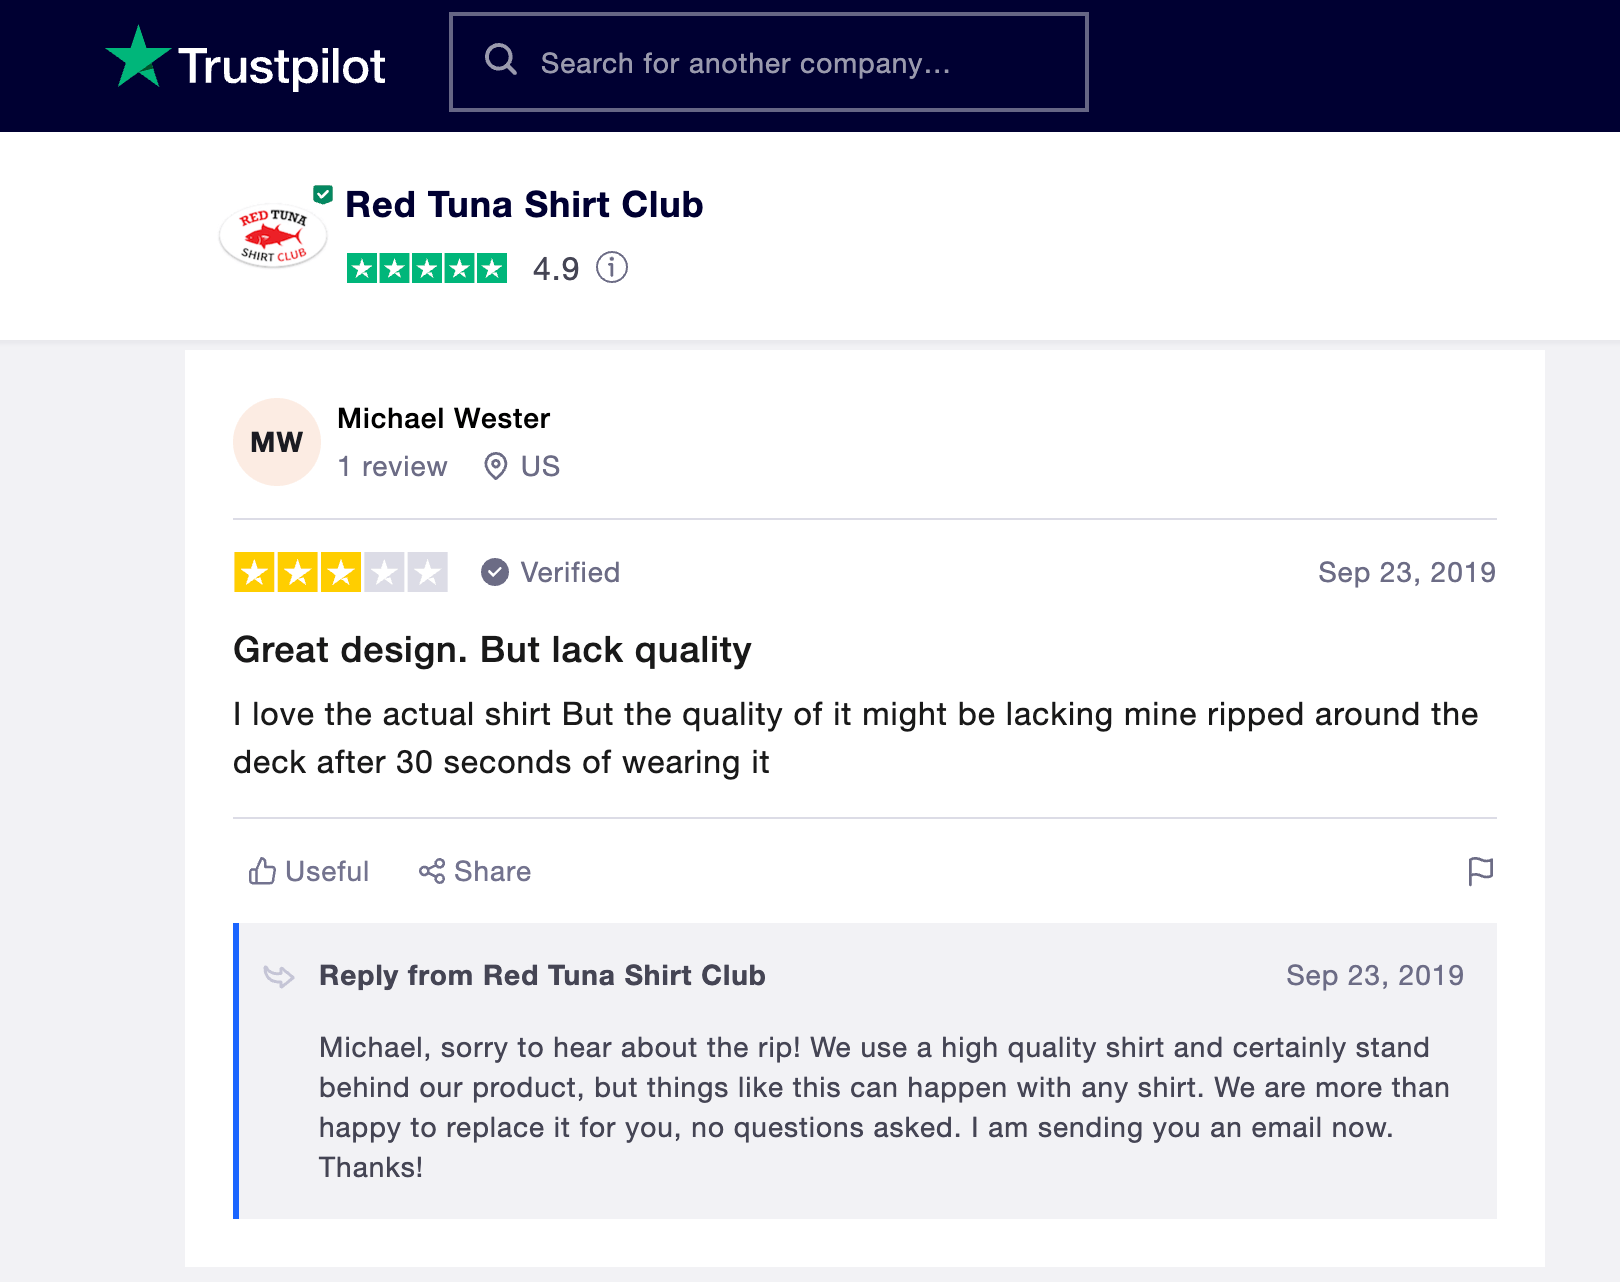 A Trustpilot review for the Red Tuna Shirt Club stated great design but lacking quality with a response from the company.